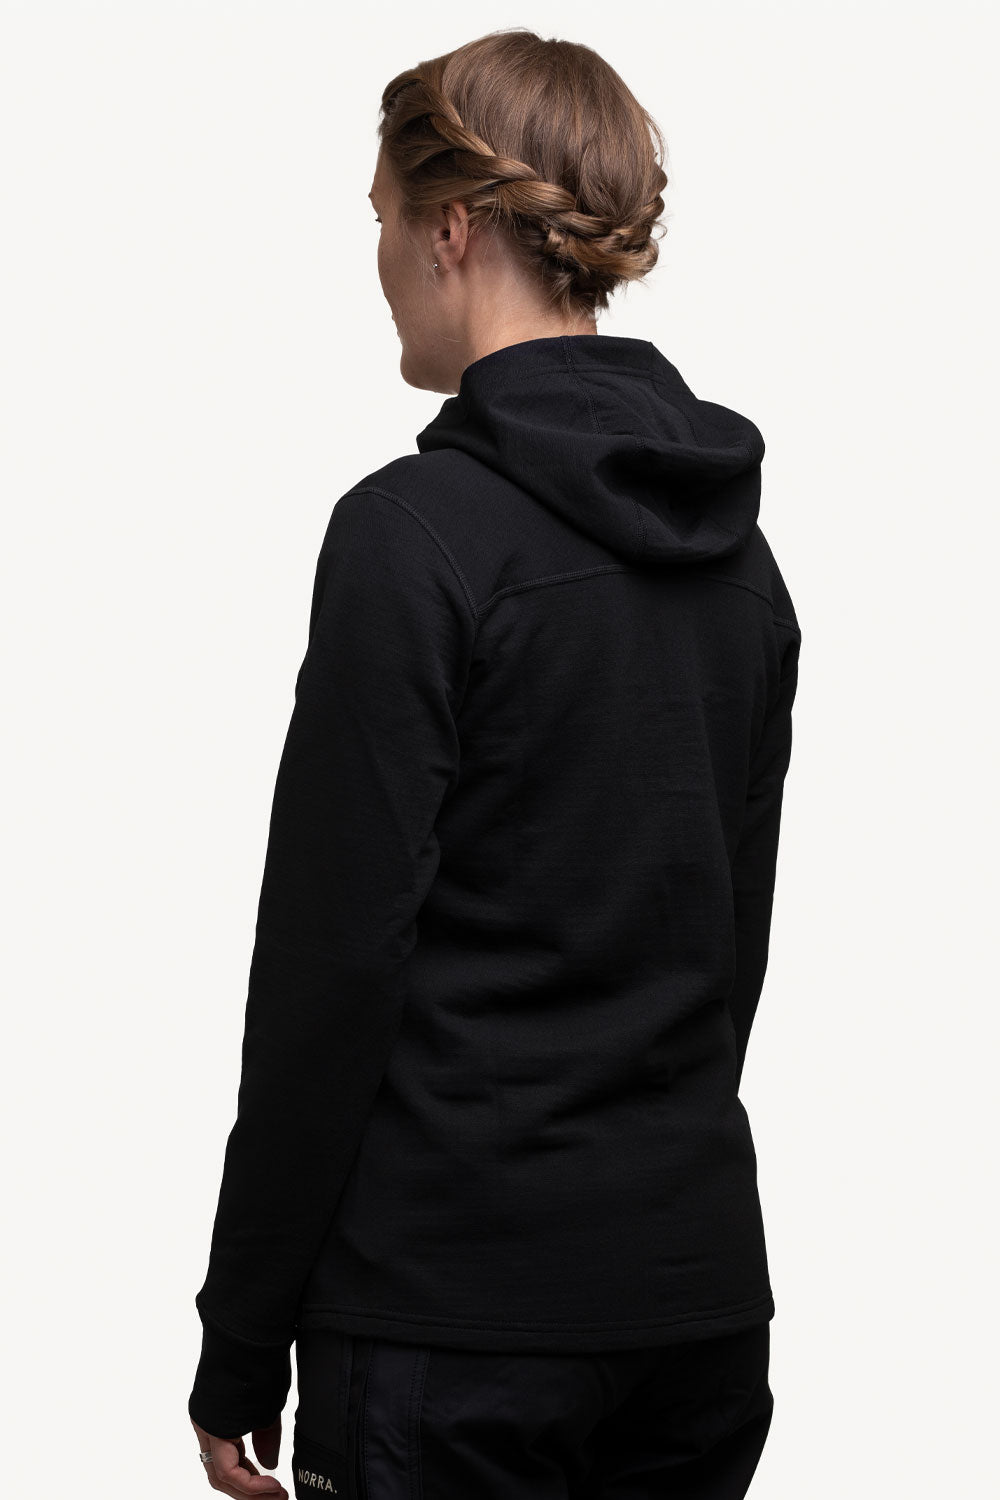 All weather technical hoodie, dam.